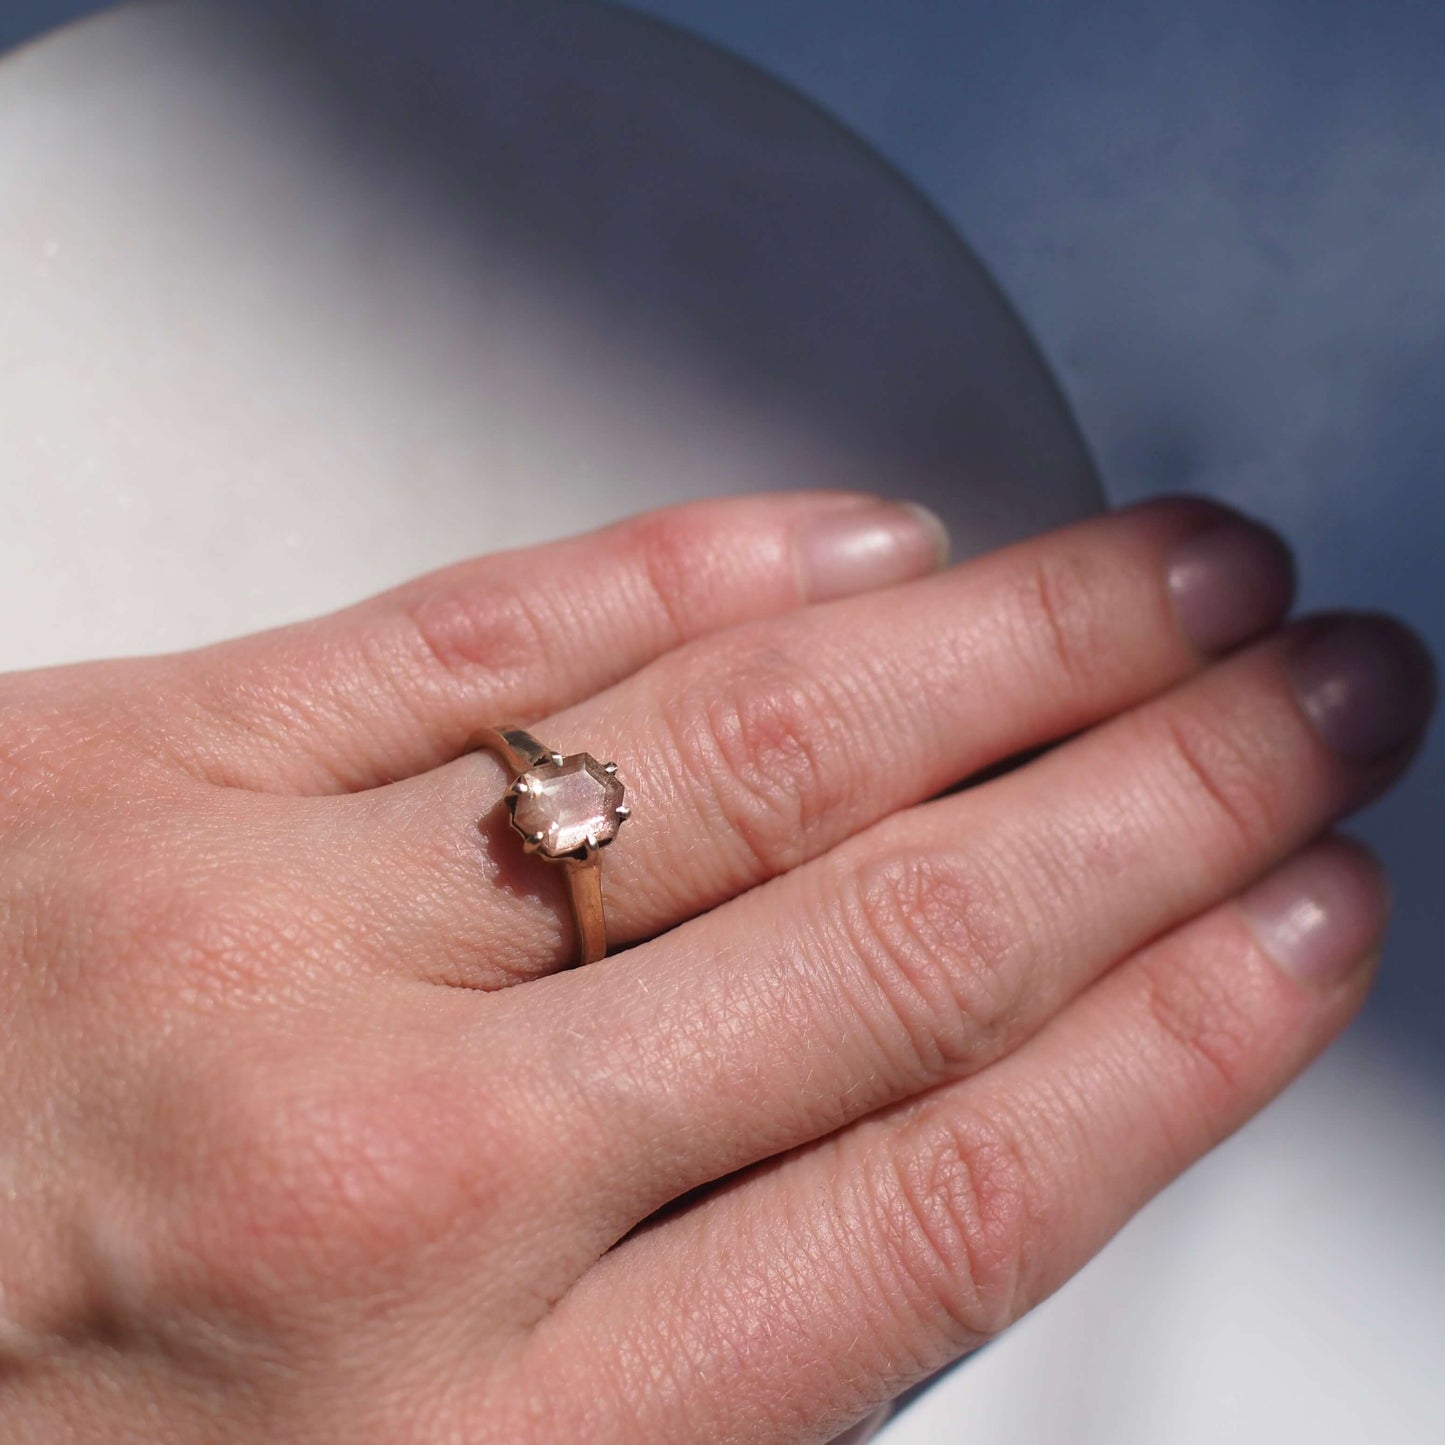 Shimmery Oregon Sunstone hexagonal ring gold tone bronze, handmade by Iron Oxide Designs, shown on a model for scale